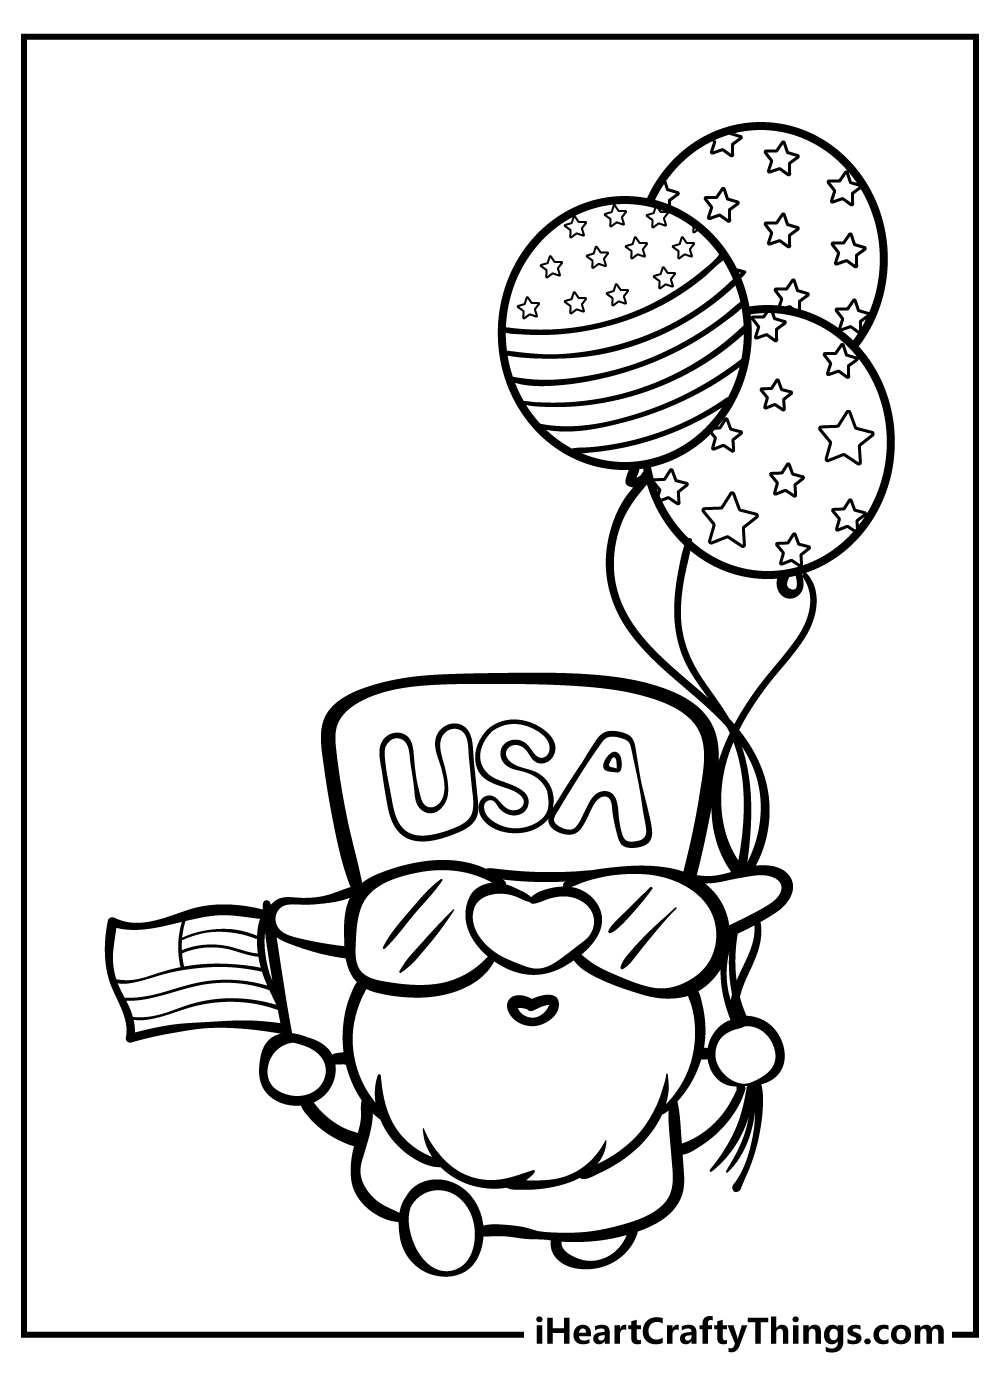 4th Of July Coloring Sheet for children free download